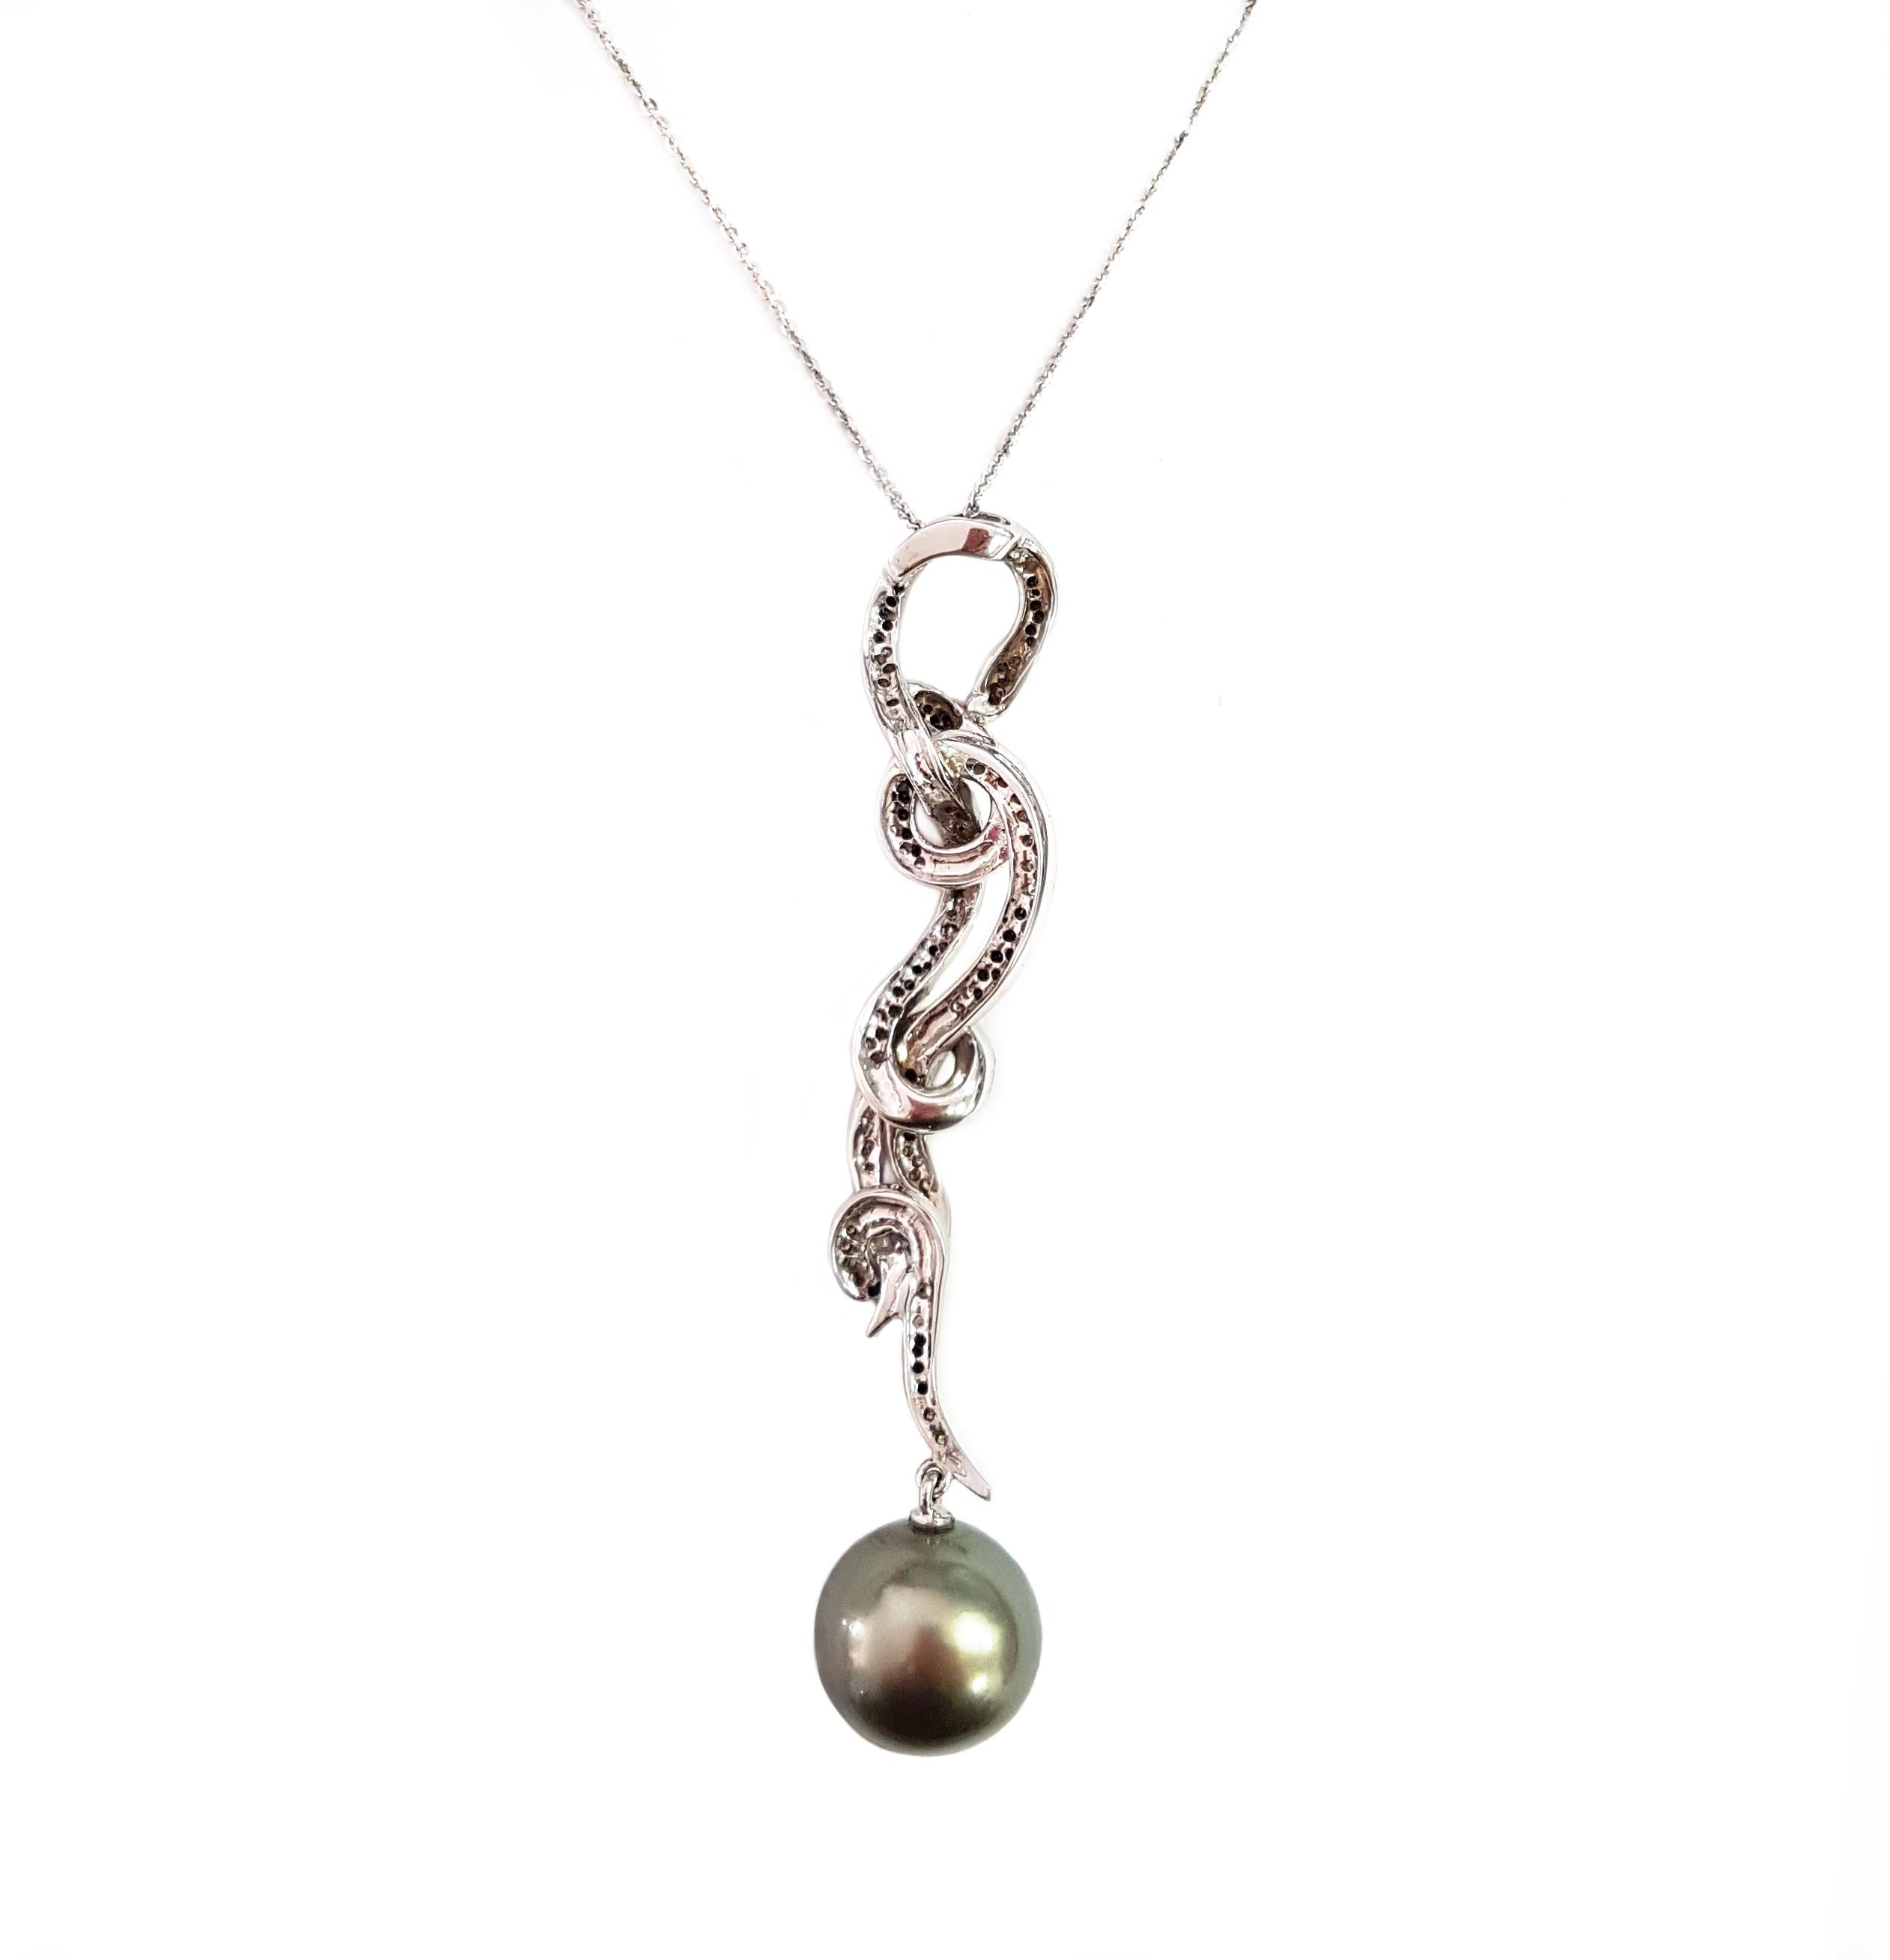 Round Cut 21st Century 18 Karat Gold Diamond and Tahitian Pearl Pendant Necklace and Chain For Sale